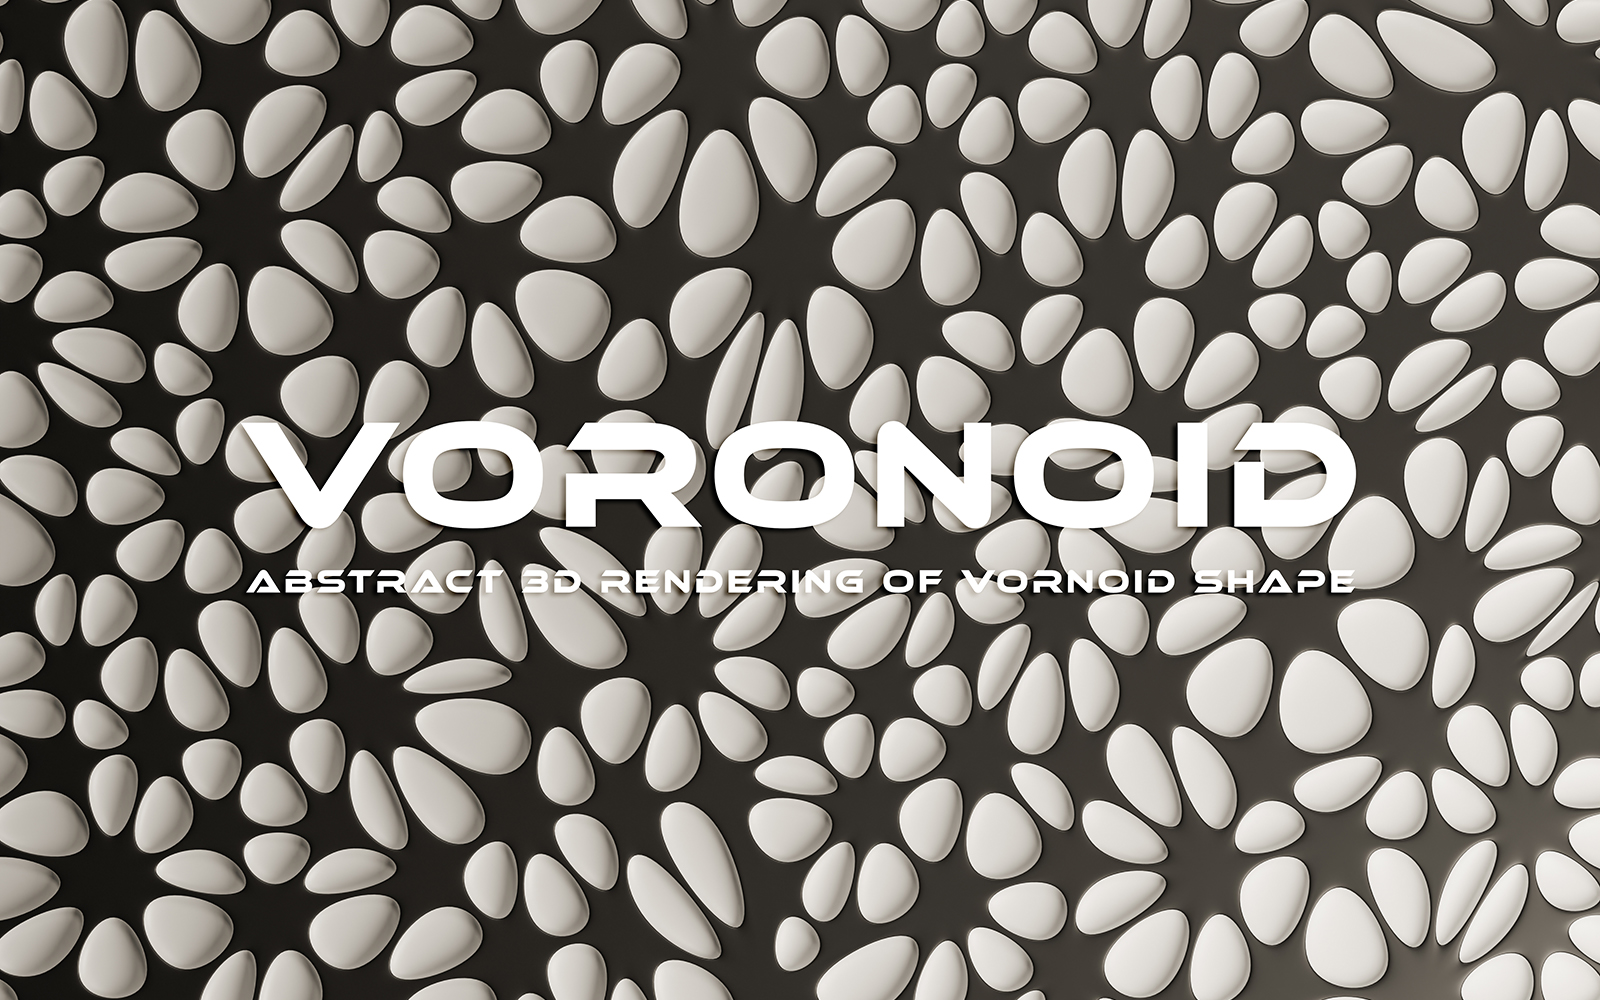 Voronoid Abstract Background